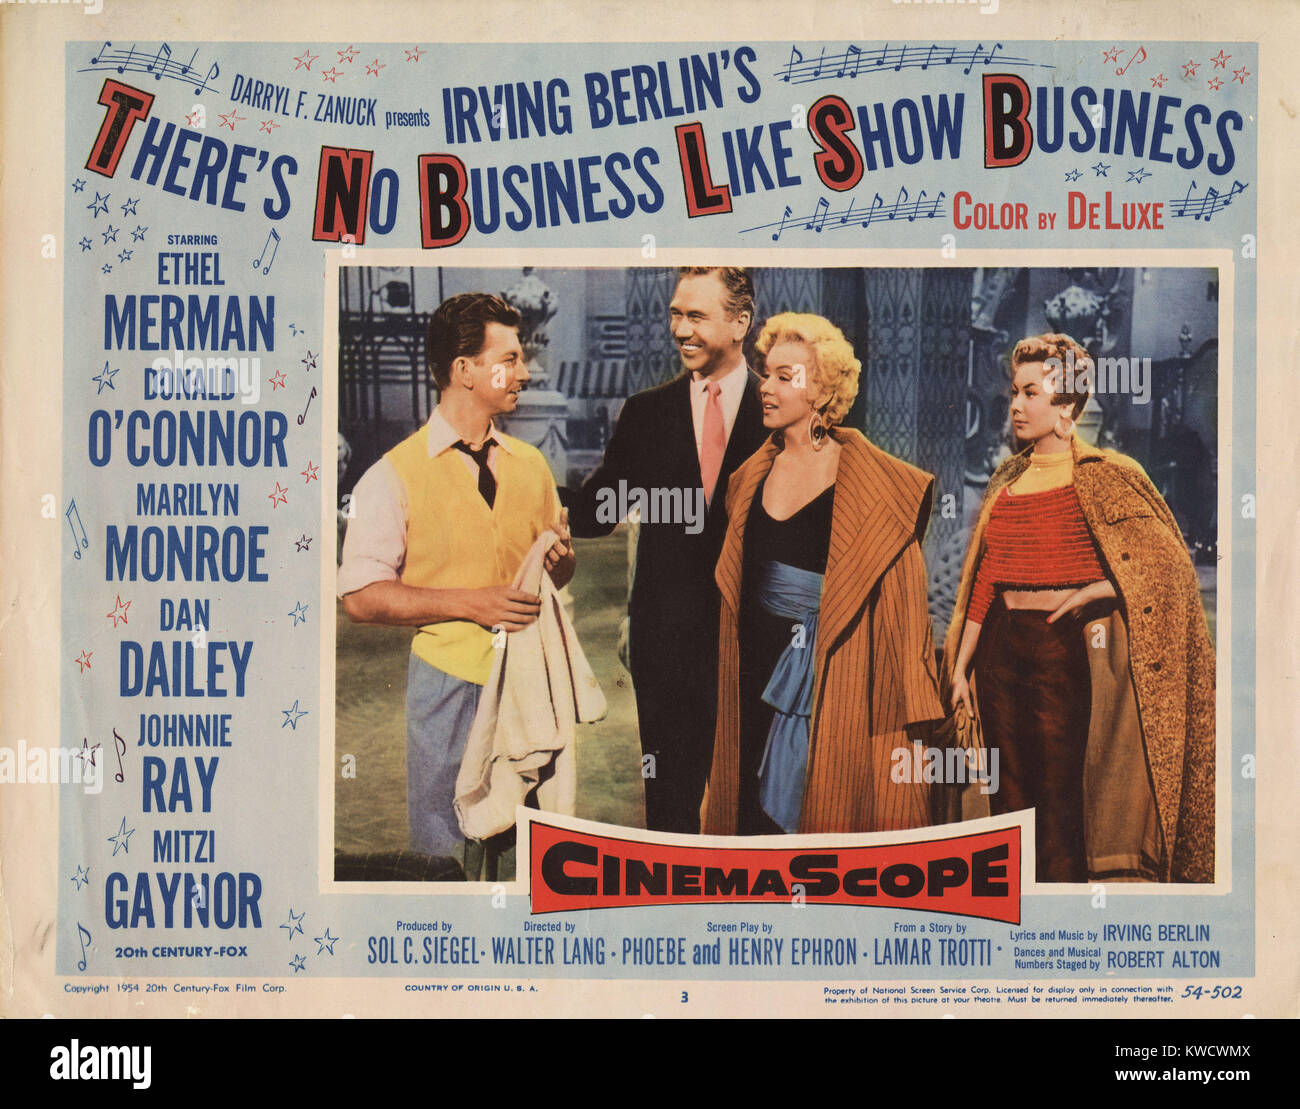 THERE'S NO BUSINESS LIKE SHOW BUSINESS, from left, Donald O'Connor, Marilyn Monroe, Mitzi Gaynor, 1954. Stock Photo